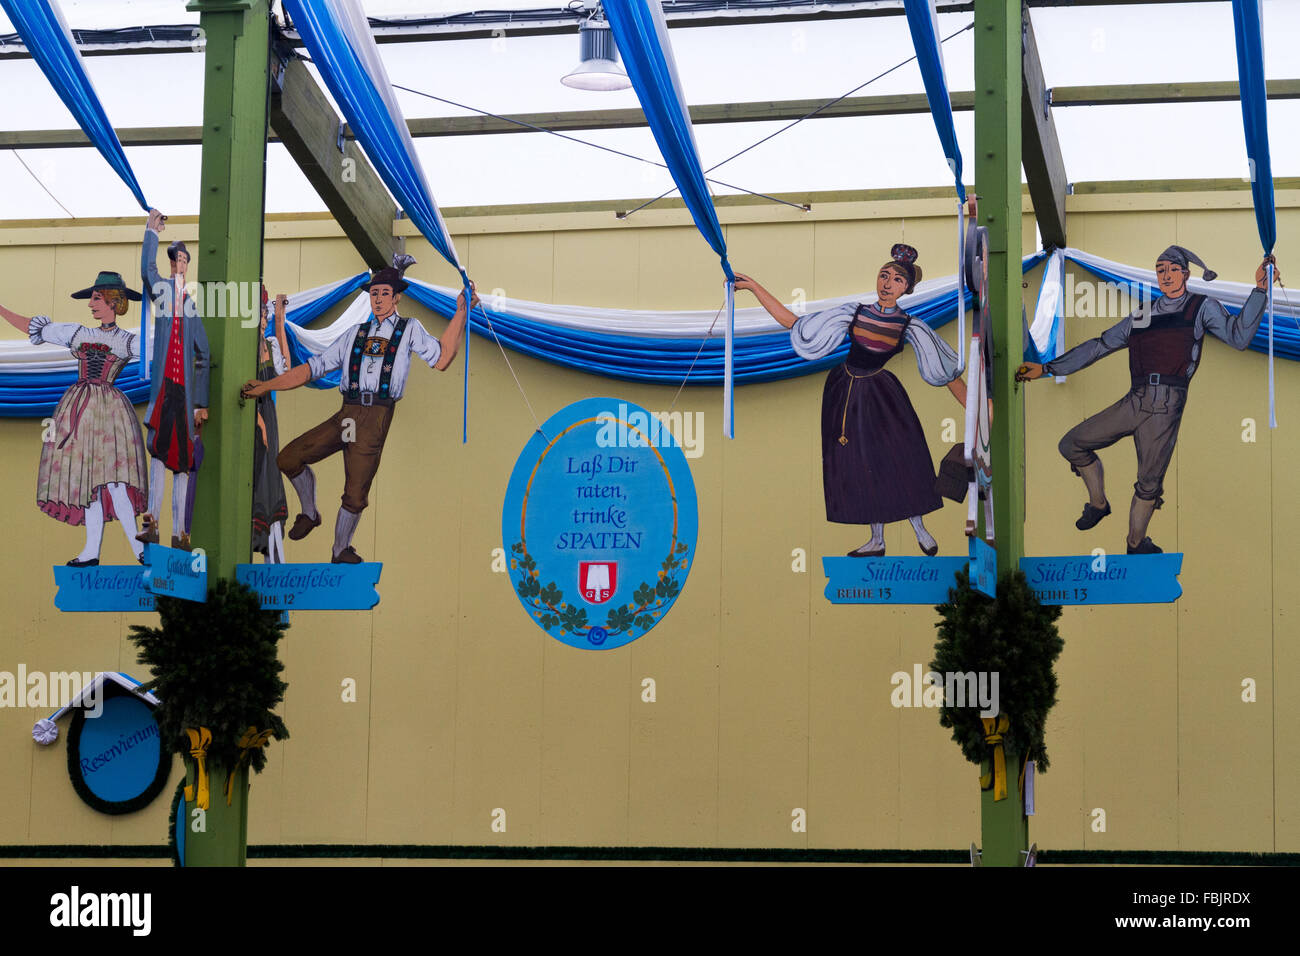 Decorative dancing figures hanging in a beer tent at Oktoberfest in Munich, Germany. Stock Photo